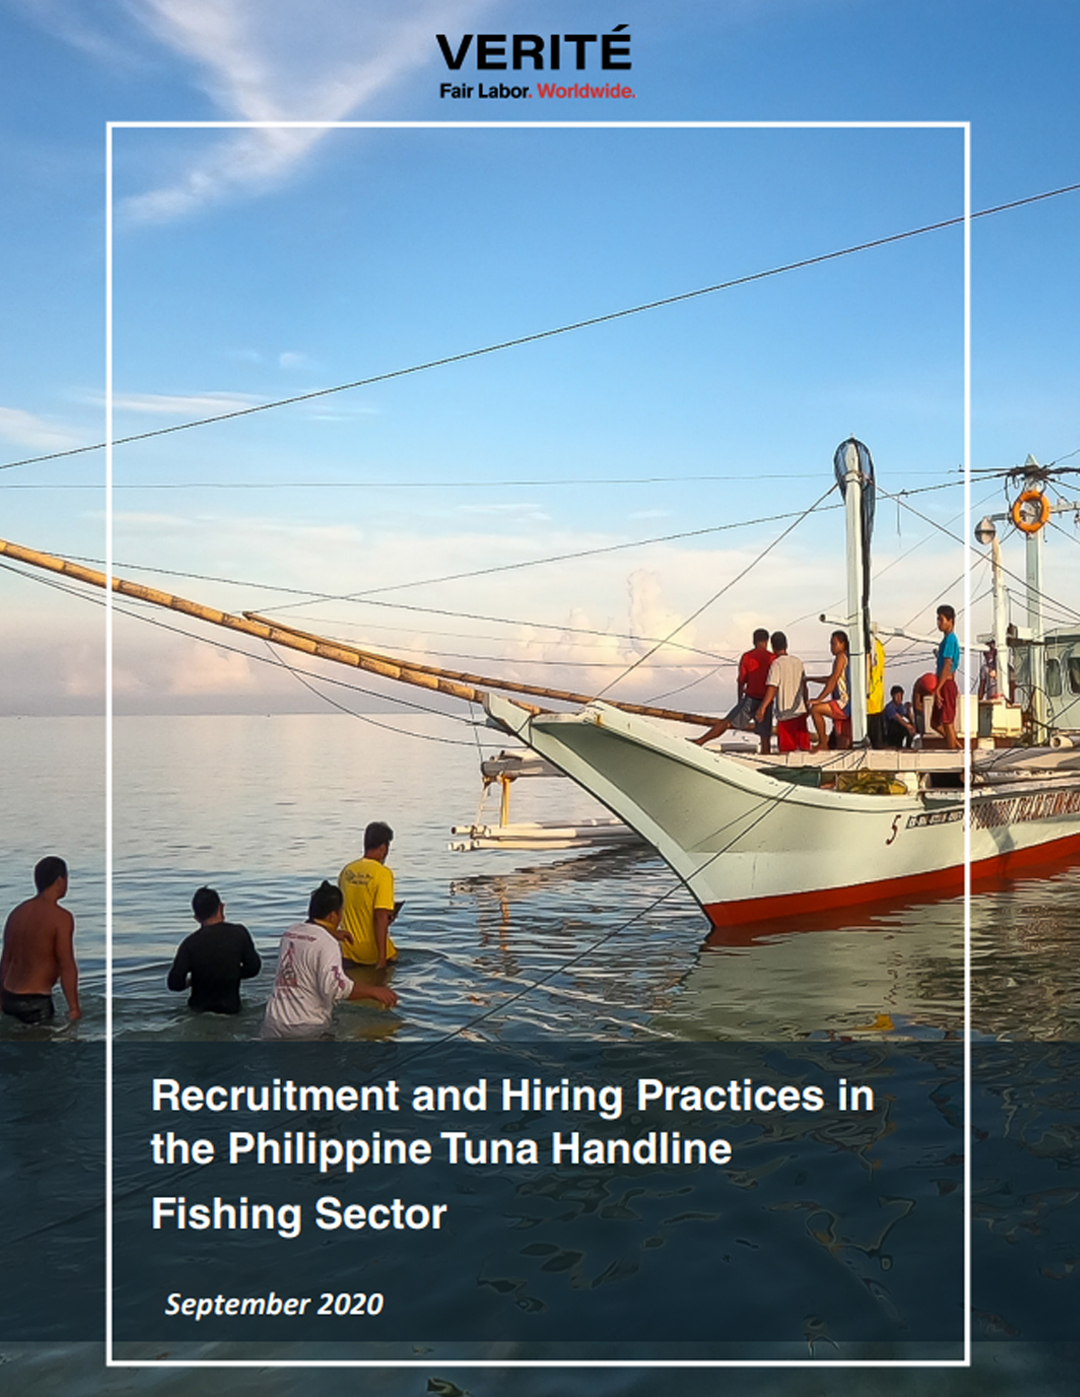 hiring practices in the Philippine tuna